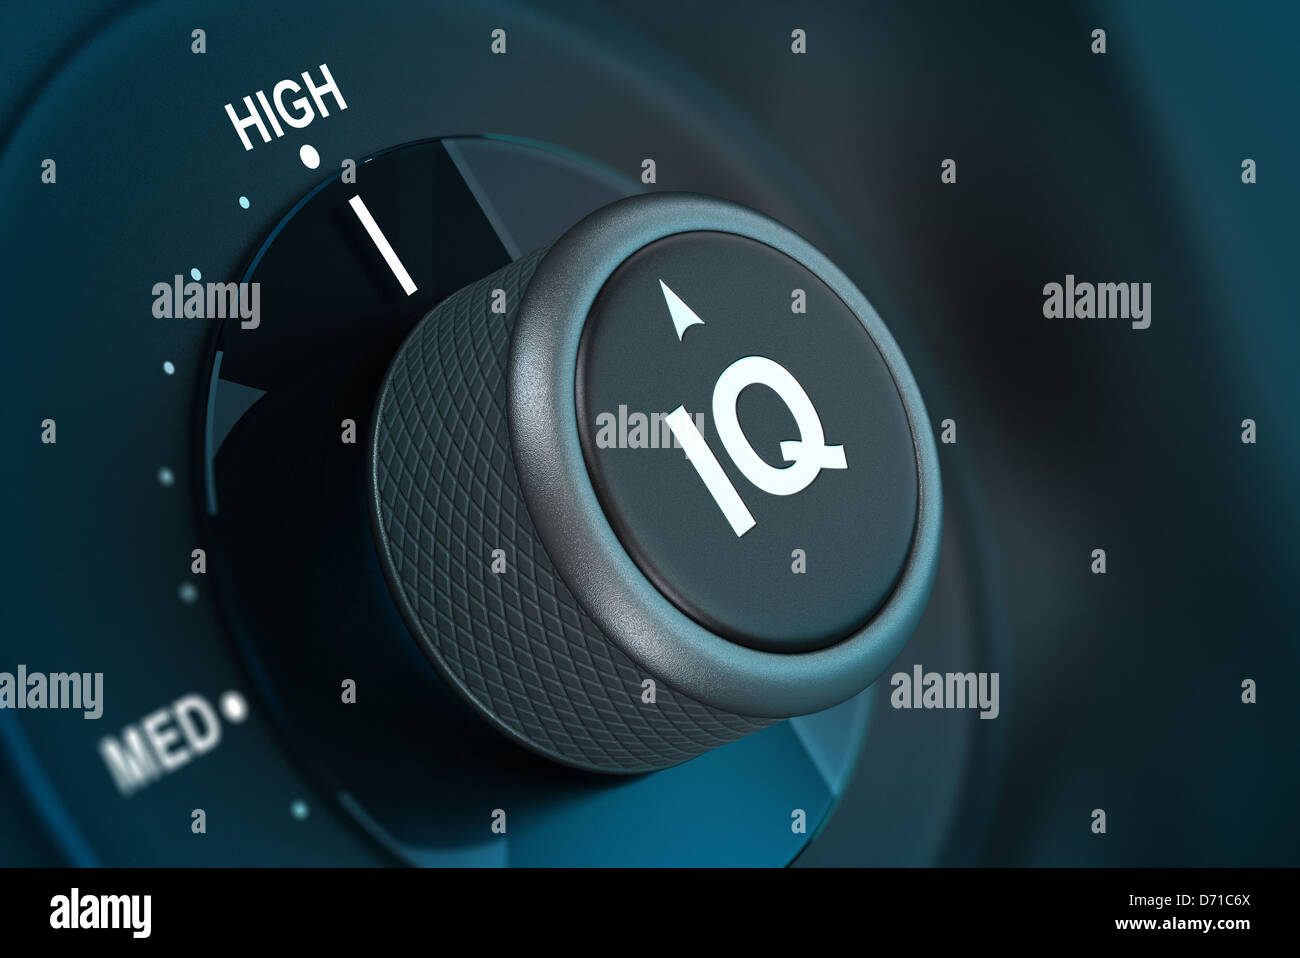 IQ button pointing on hith level, 3d render image vith blue tones and blur effect Stock Photo